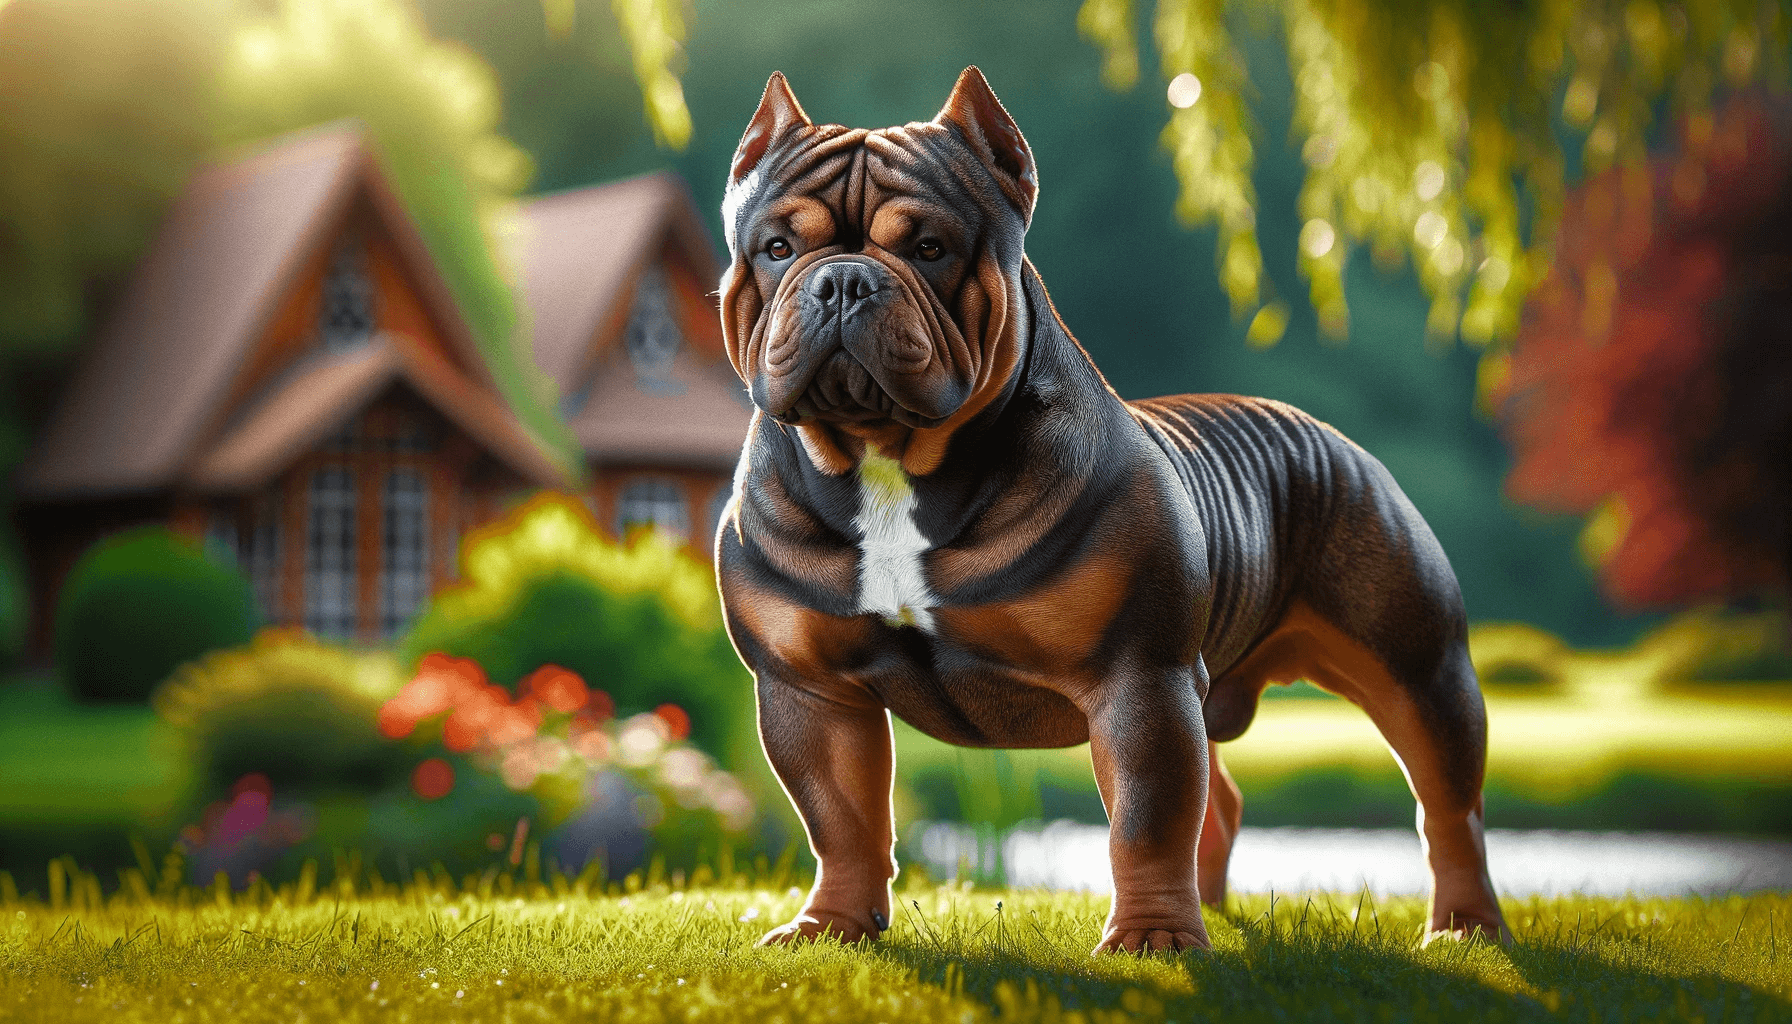 Exotic Bully standing in a picturesque outdoor setting, showcasing its compact and muscular physique with a gleaming coat.